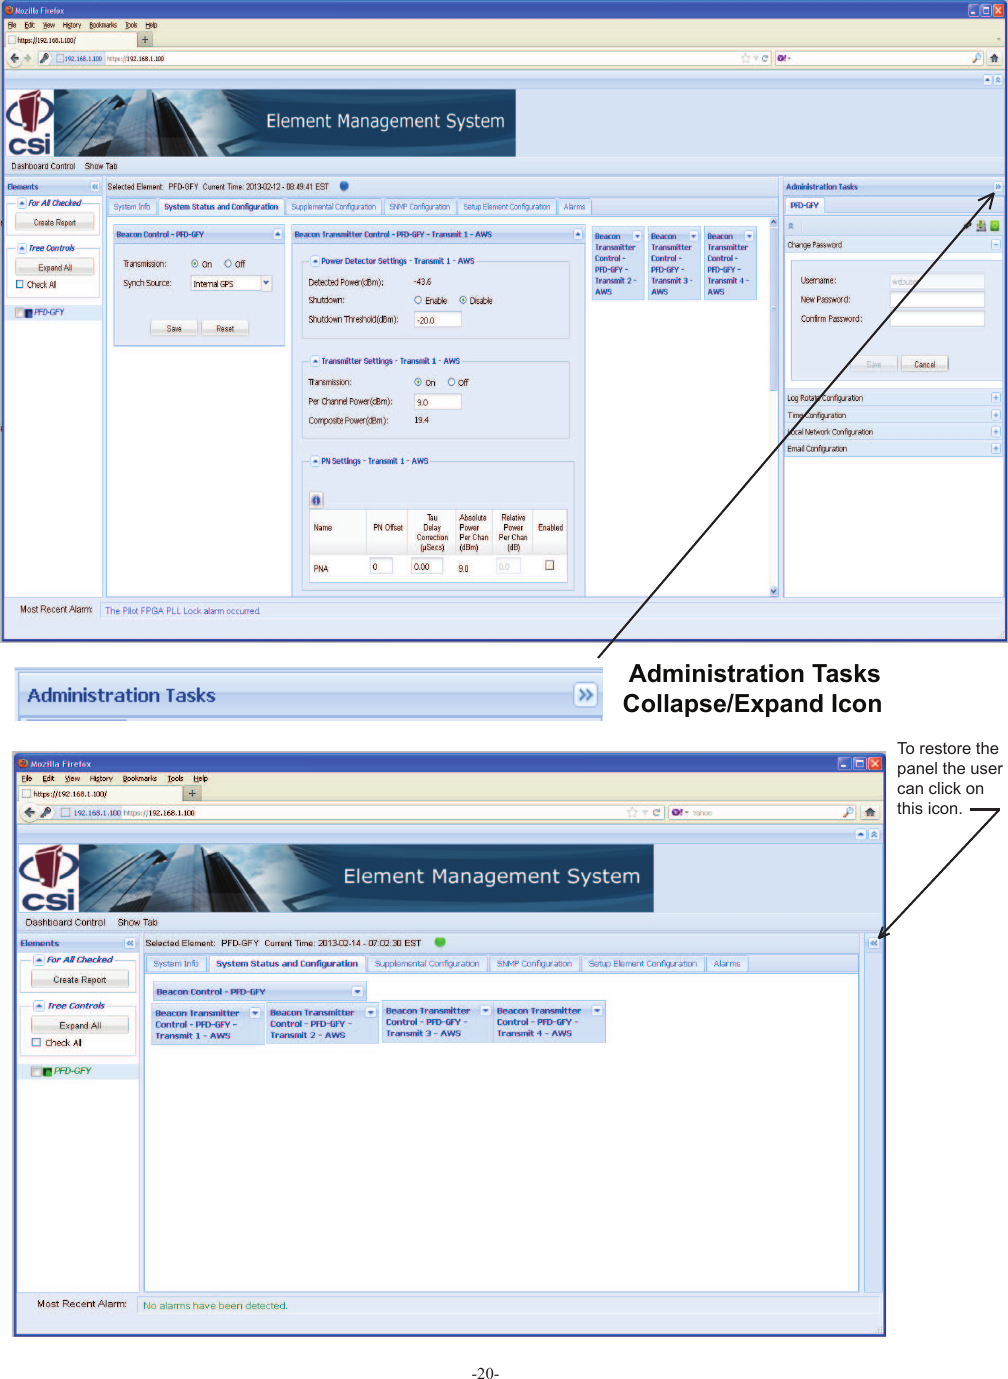 -20-  Administration Tasks Collapse/Expand IconTo restore the panel the user can click on this icon.